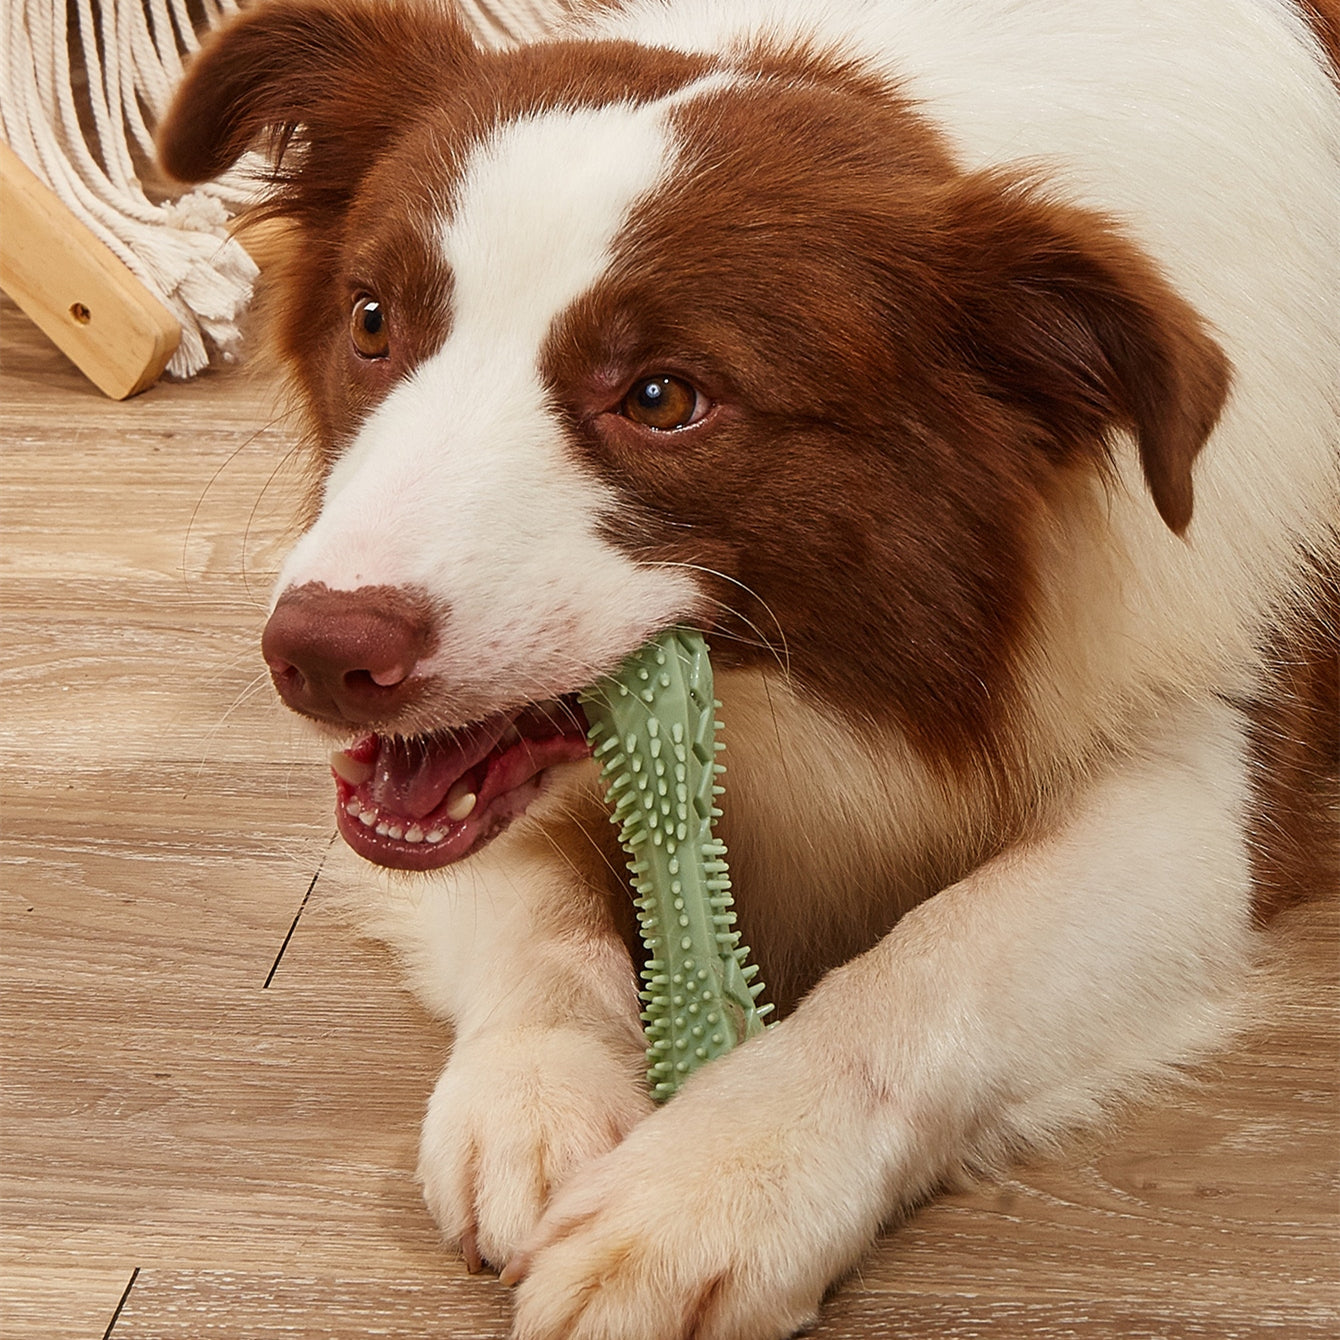 Dog Chew Toothbrush Toys